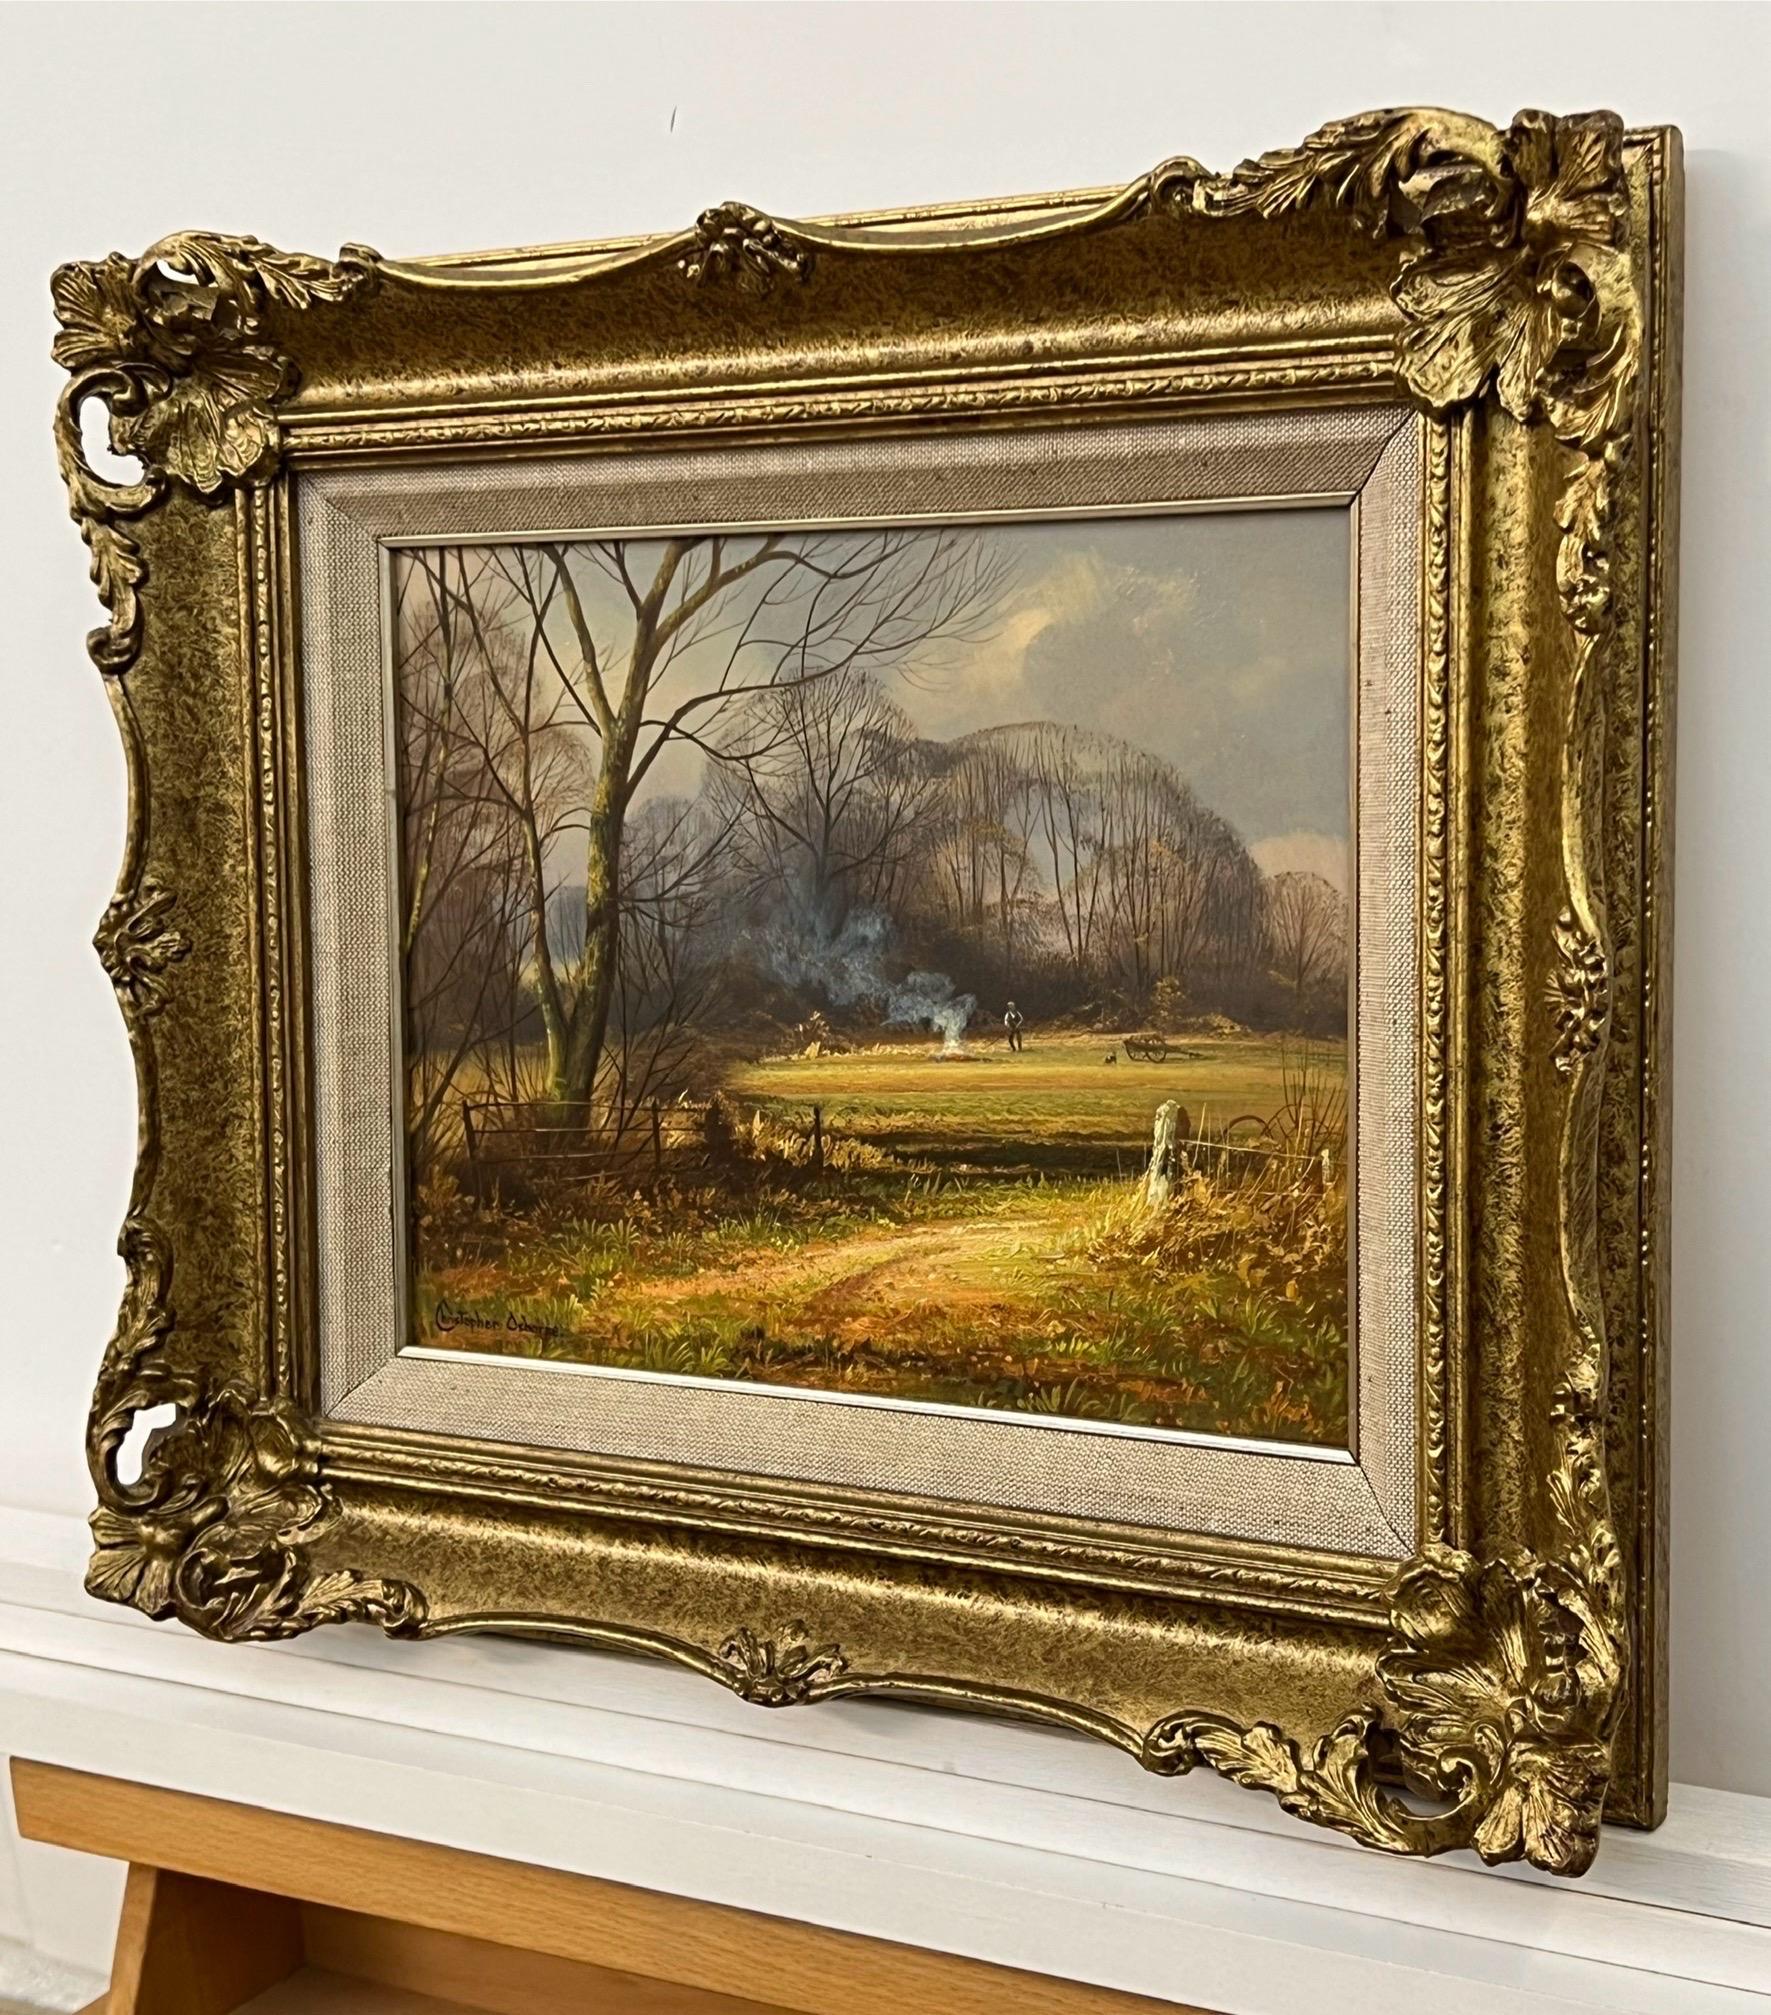 Farm in the Woods at Winter in the English Countryside with Warm Brown Colours by 20th Century British Artist, Christopher Osborne. 

Art measures 12 x 8 inches 
Frame measures 16 x 12 inches 

Signed, oil on board, presented in a gold